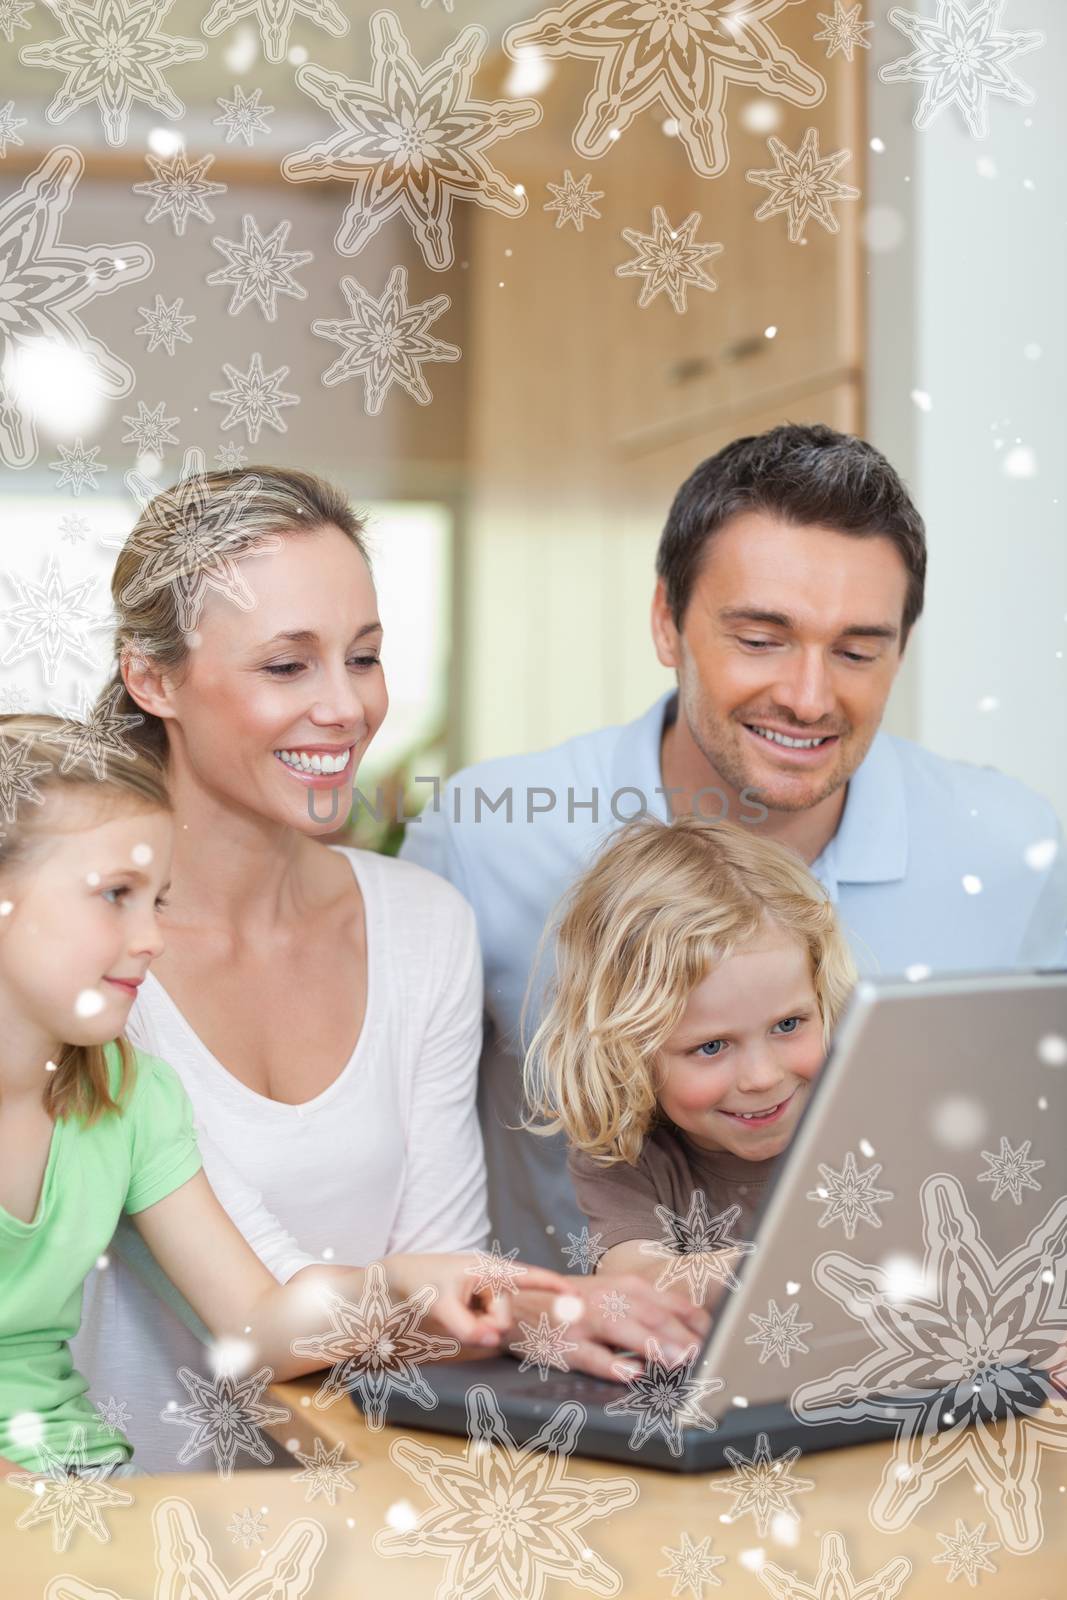 Family using laptop in the kitchen against snowflakes